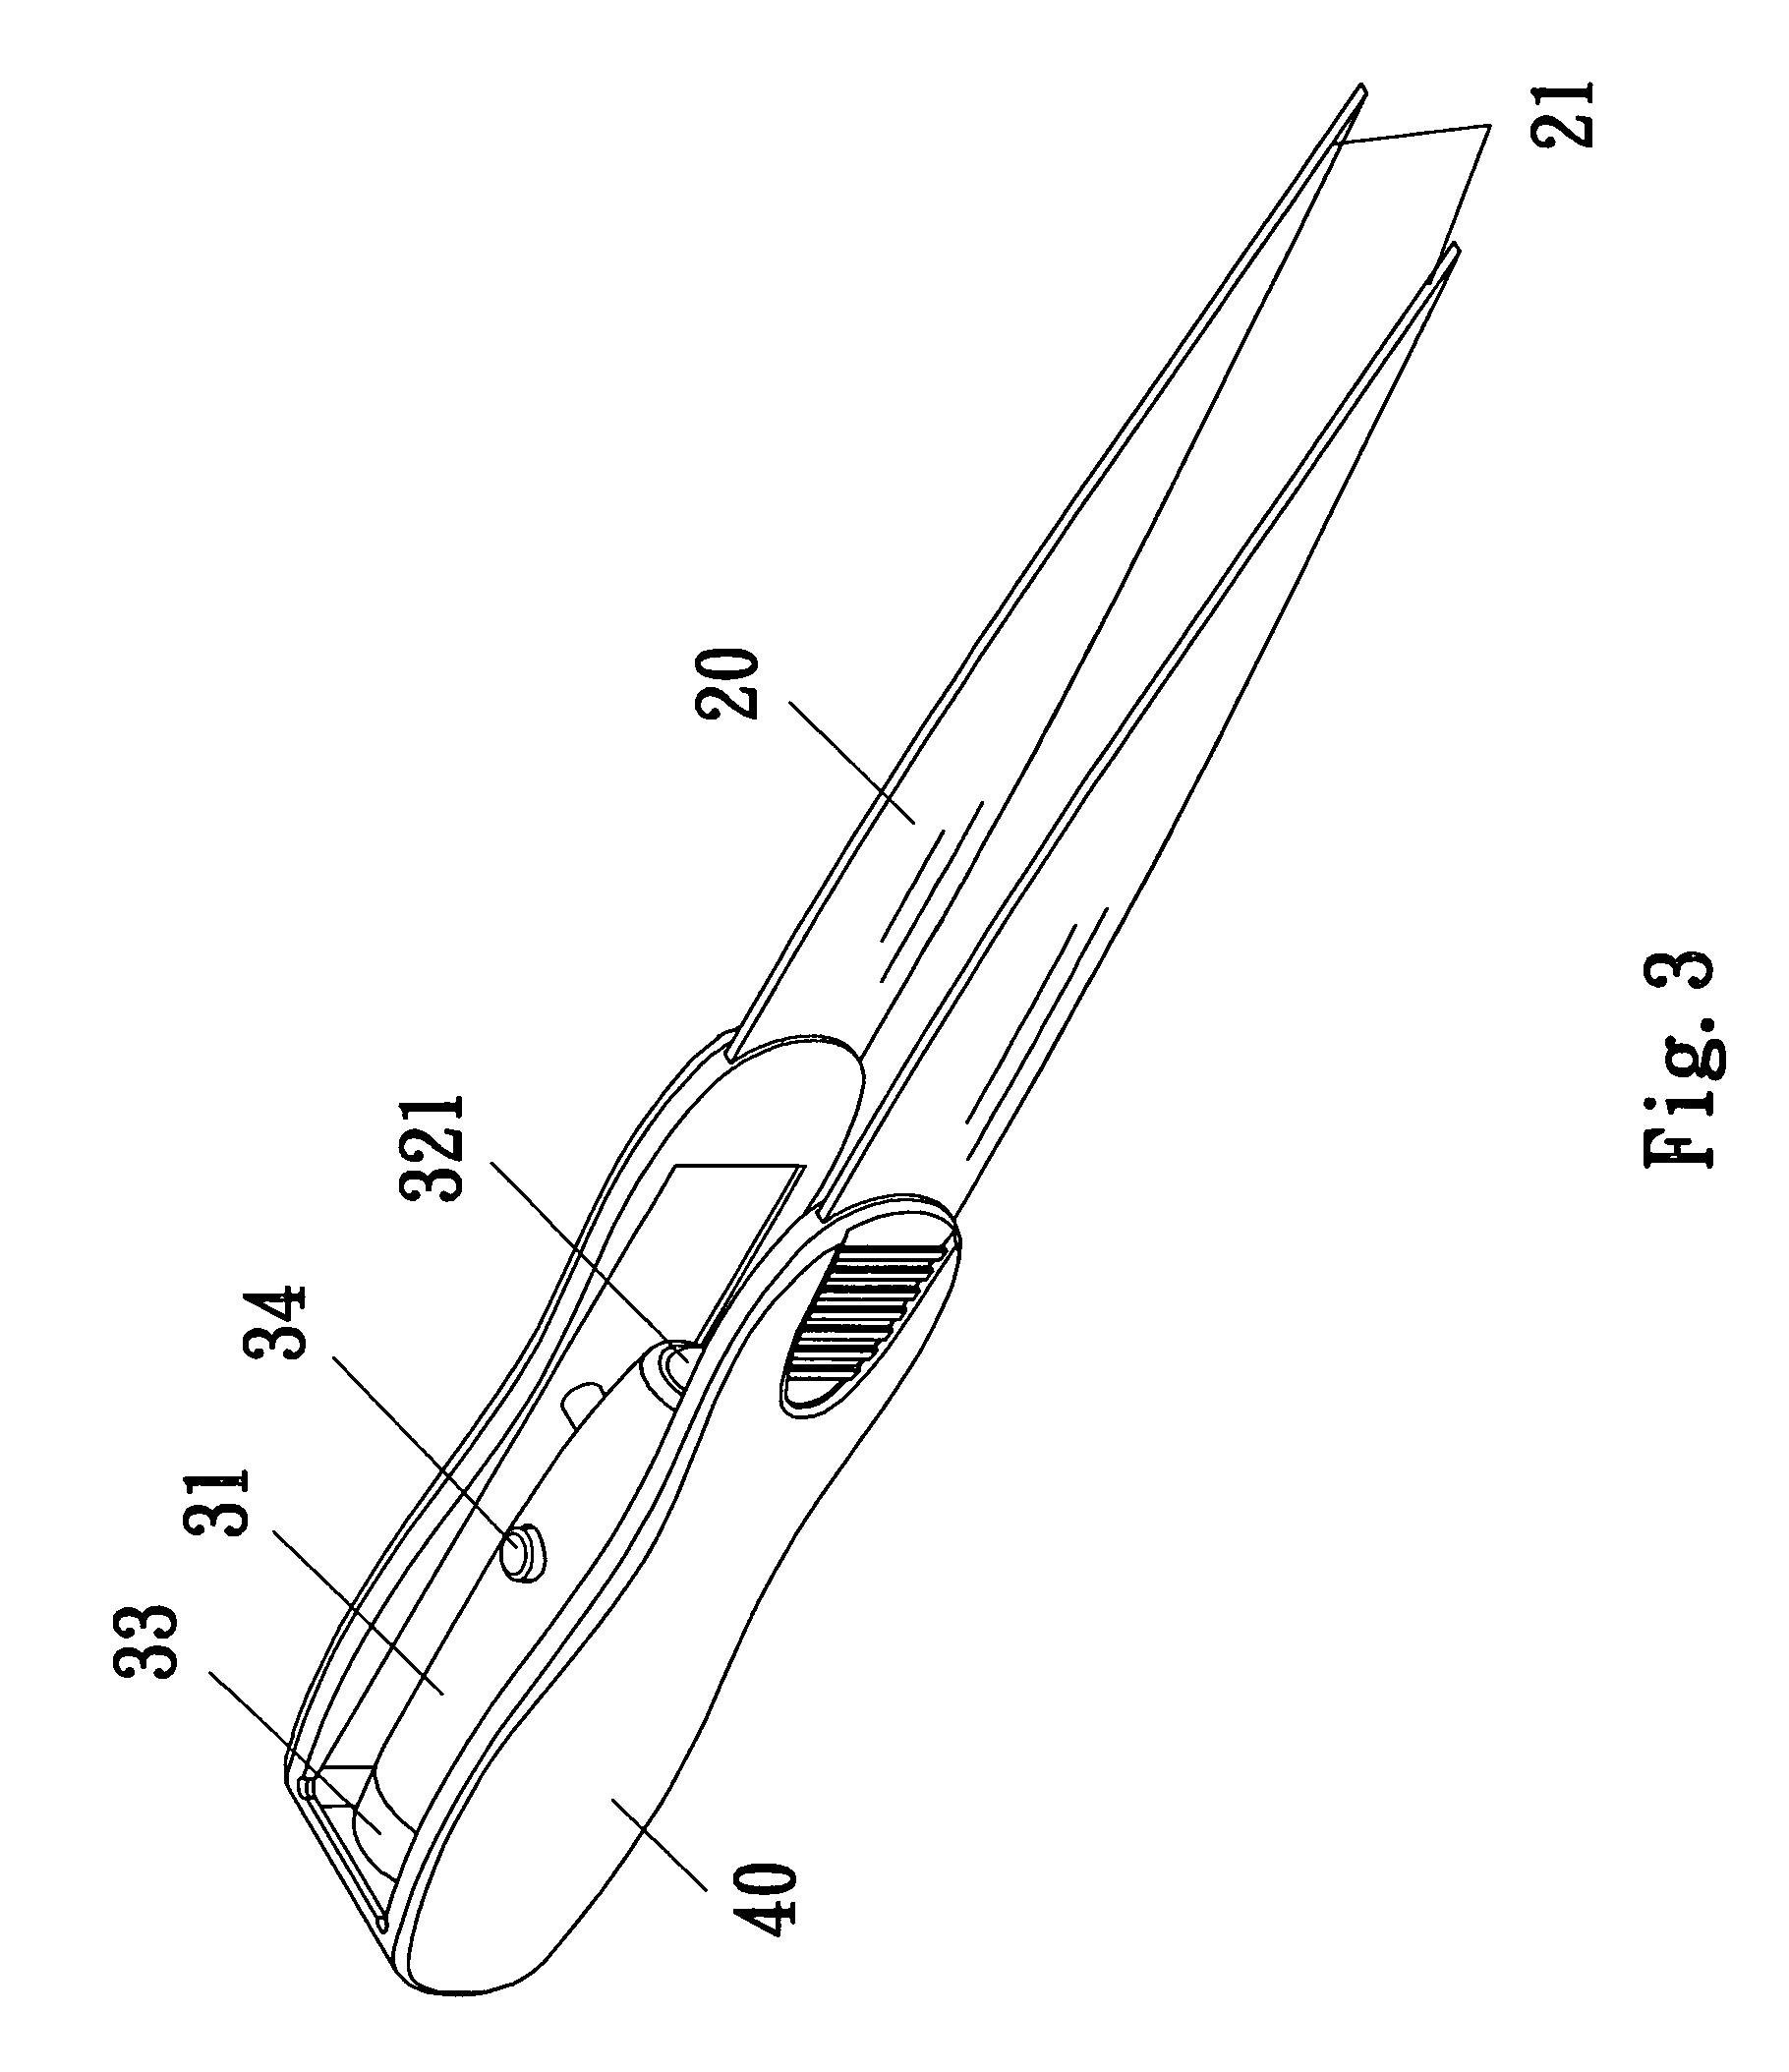 Tweezers with magnetically pivotal illumination device